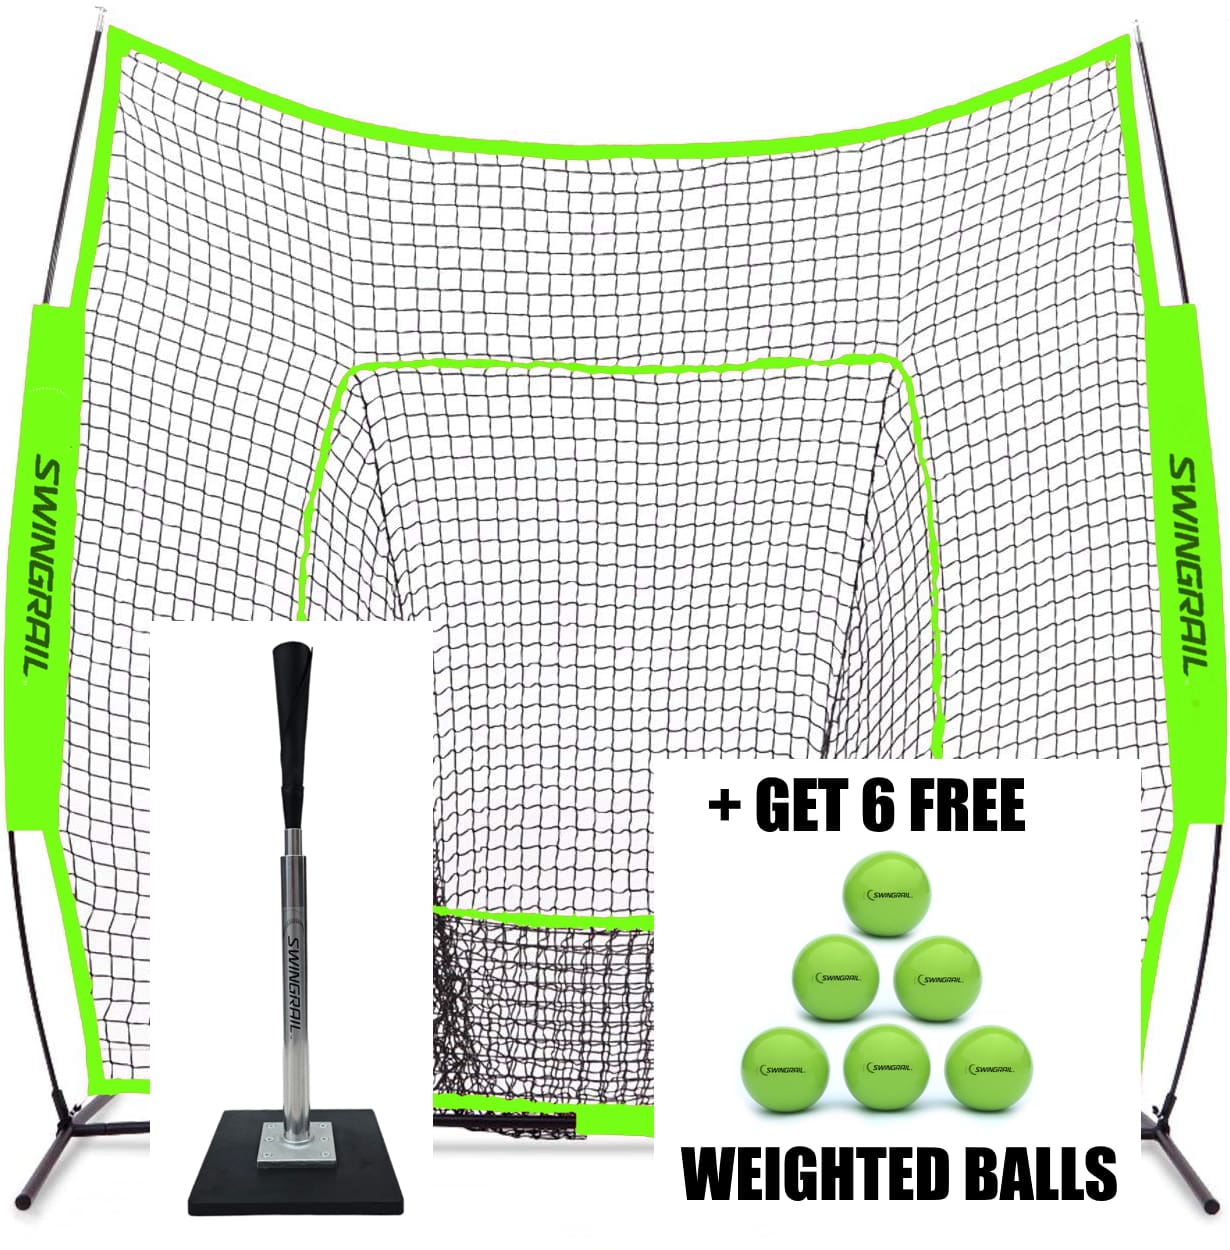 training equipment bundle includes platinum batting tee, hitting net and 6 weighted balls